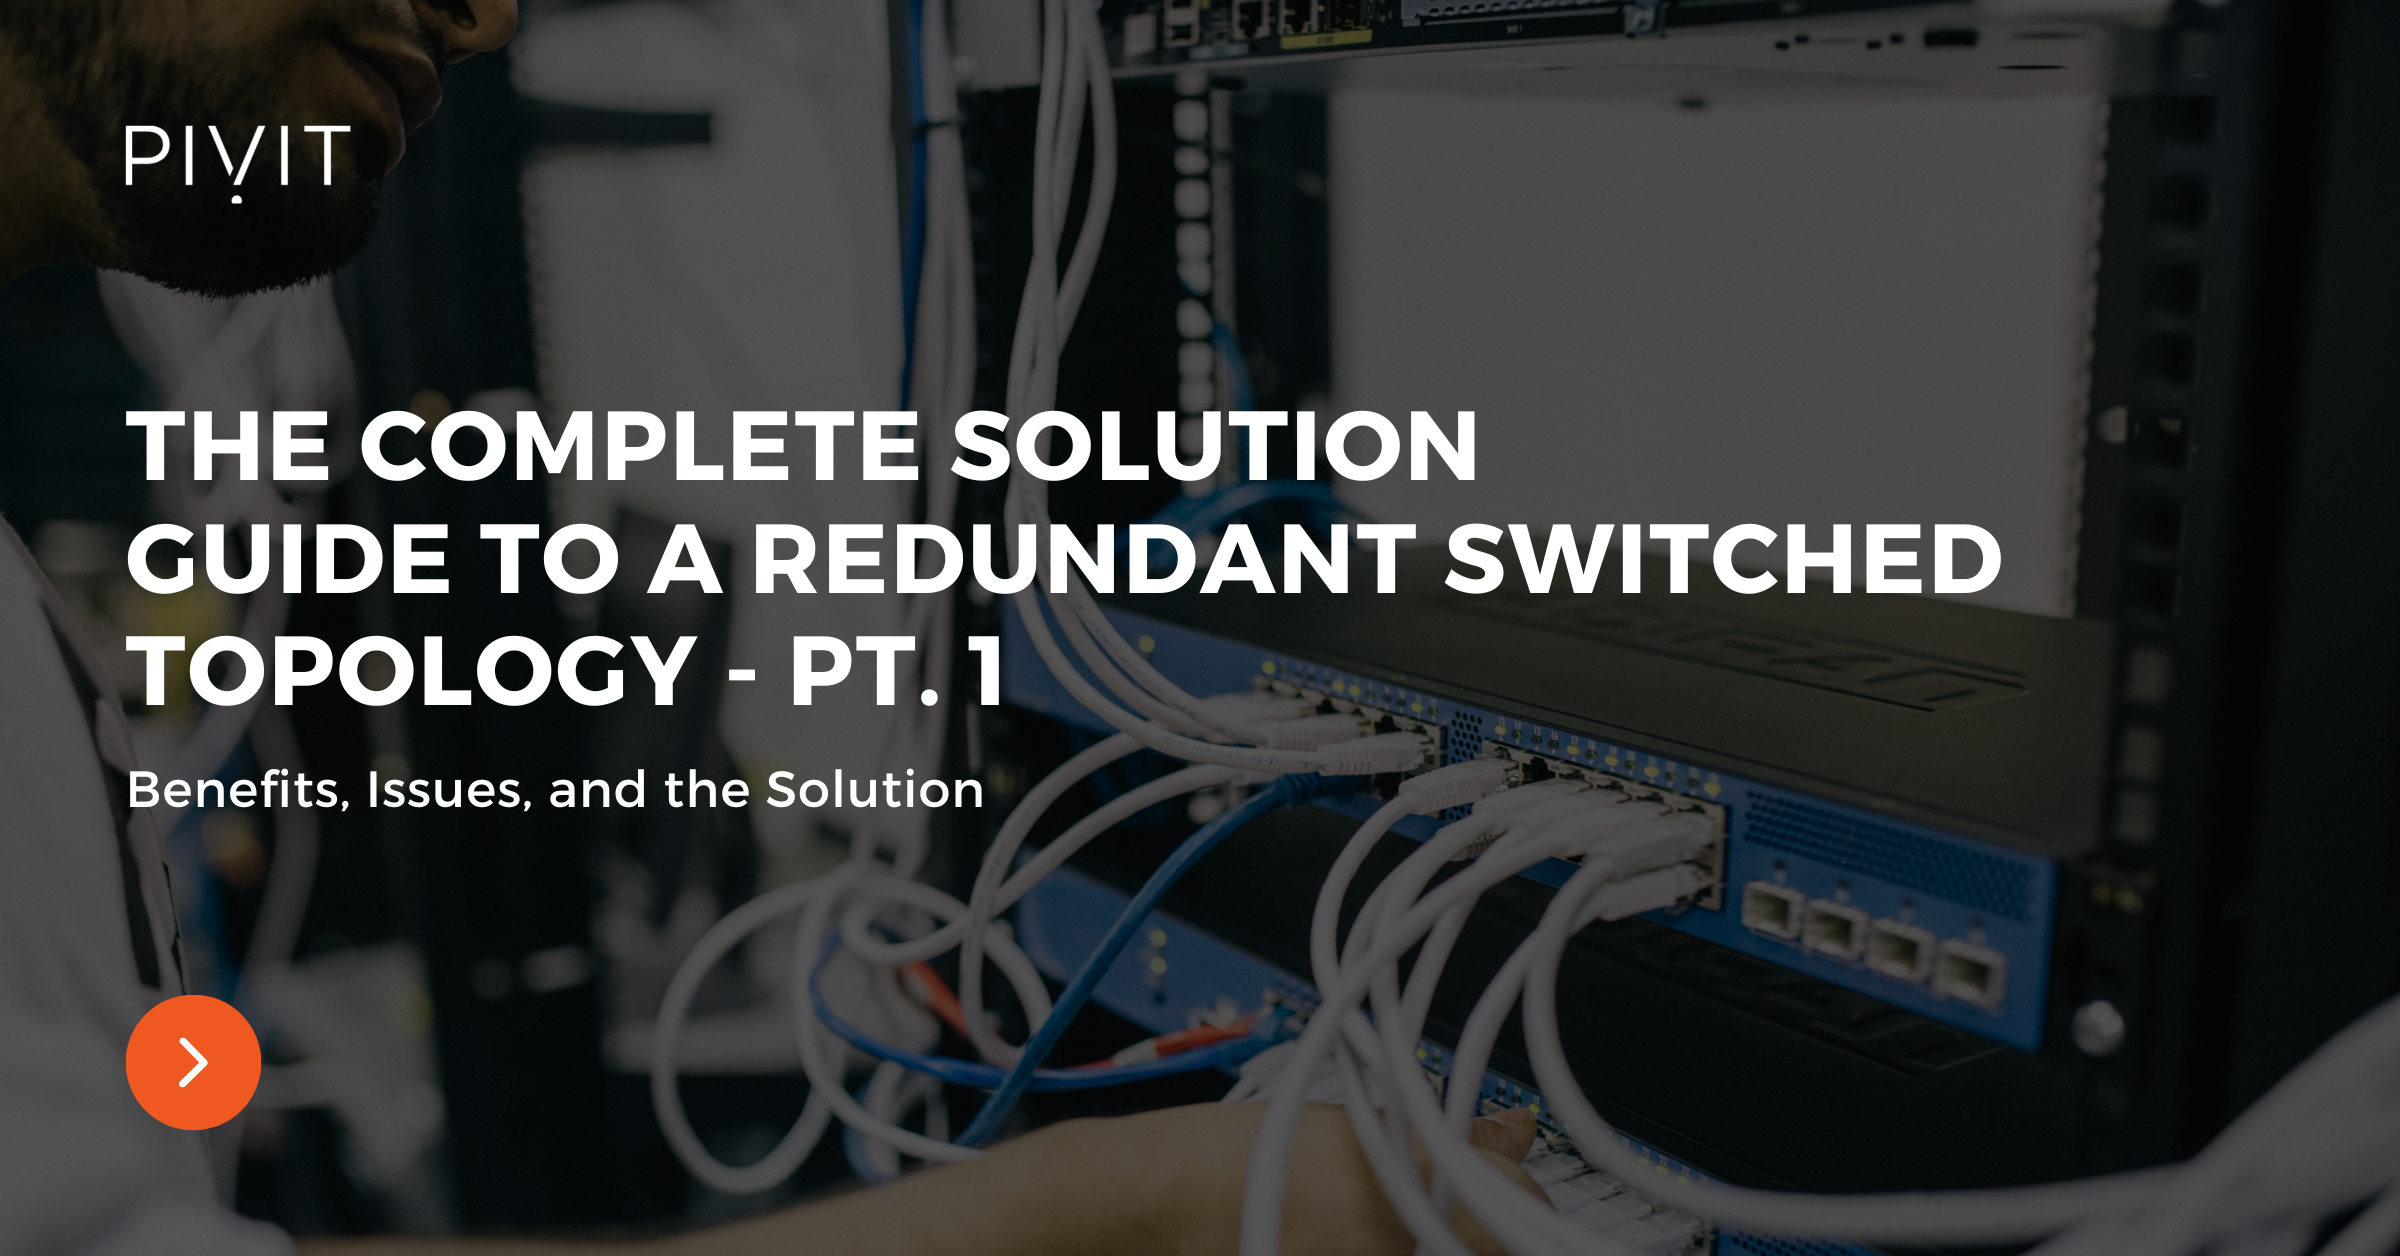 The Complete Solutions Guide to a Redundant Switched Topology – Pt. 1